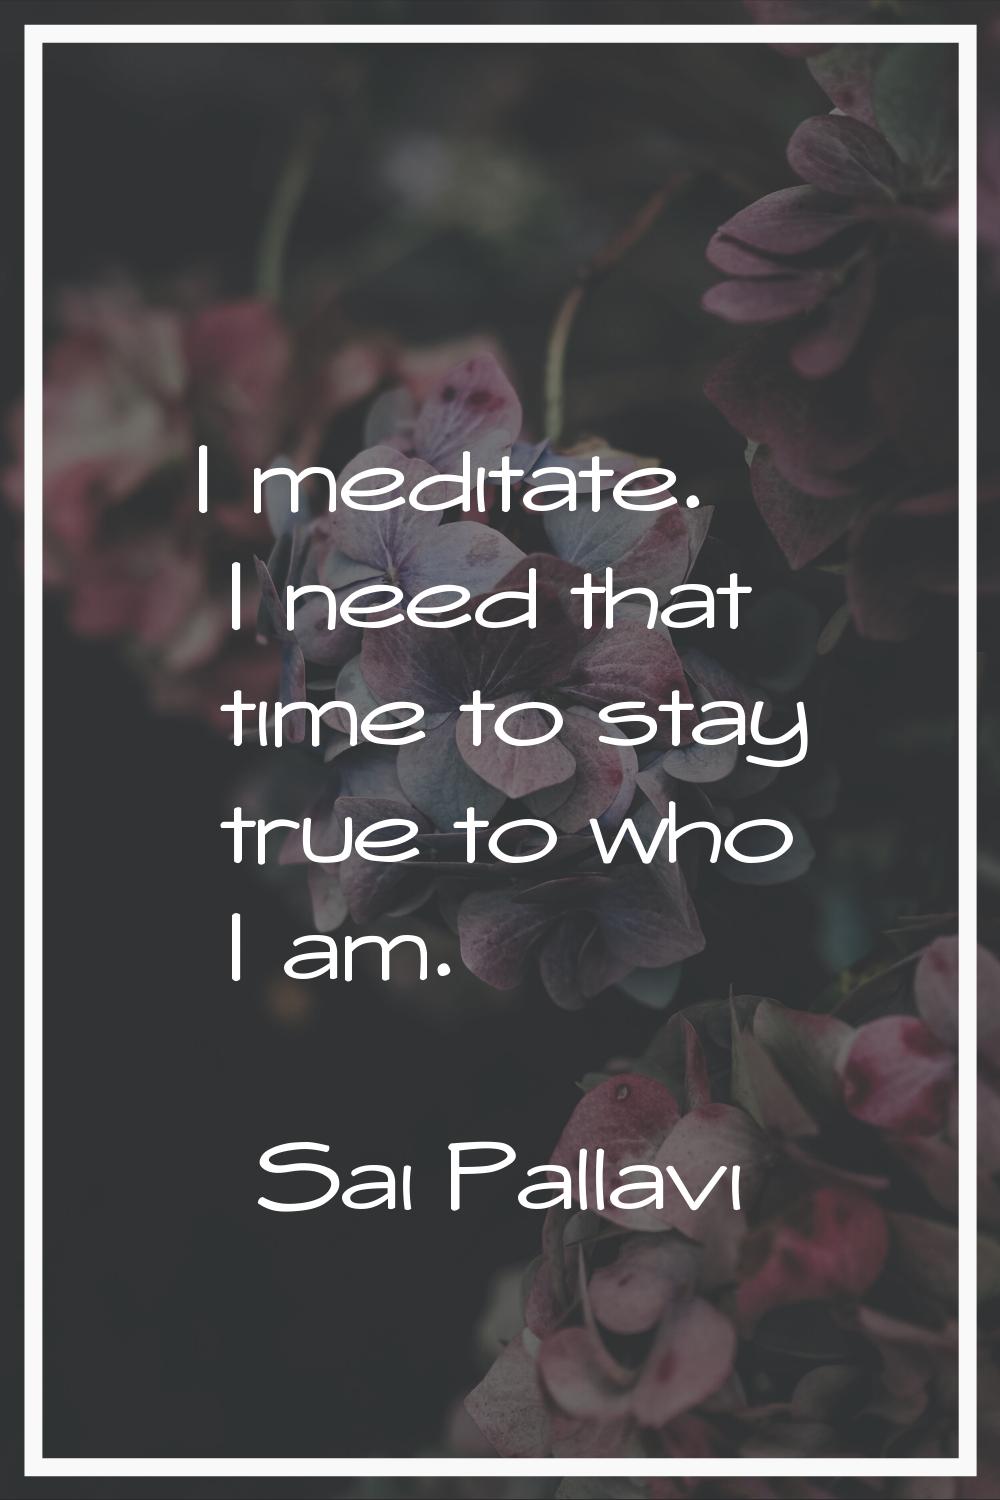 I meditate. I need that time to stay true to who I am.